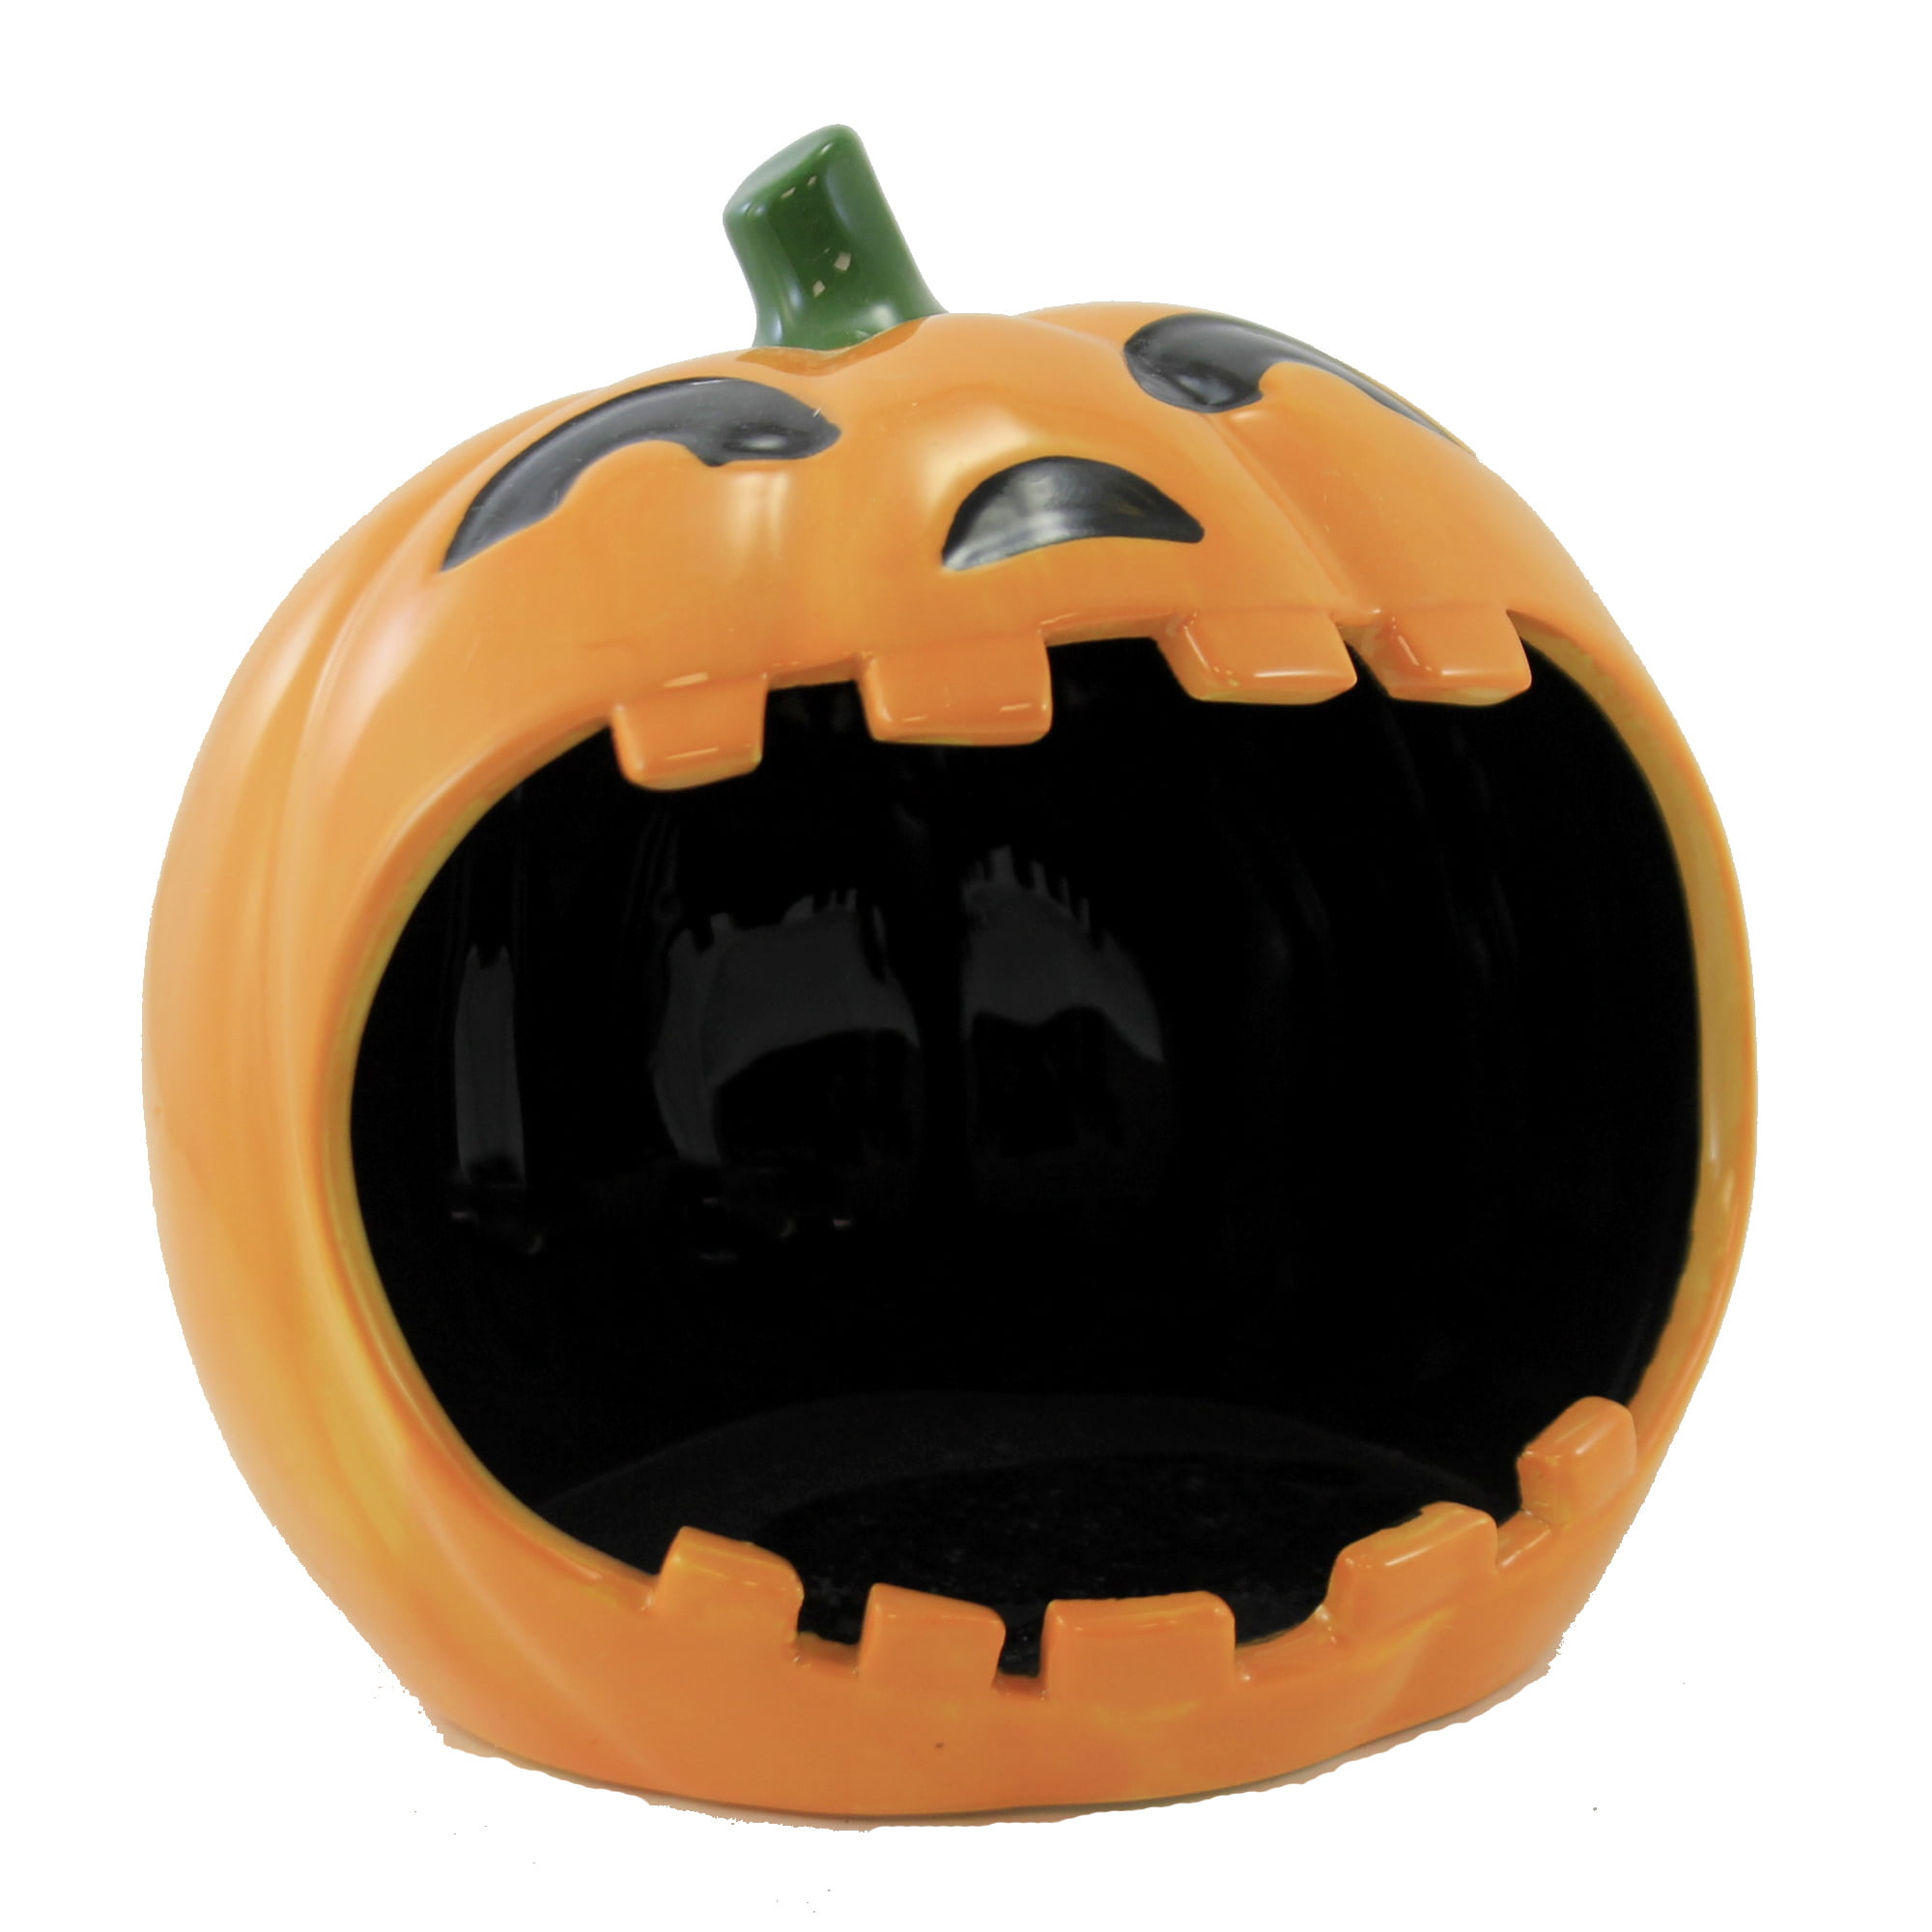 Ceramic Pumpkin Open Mouth Candy Holder Brand New Ships from USA 